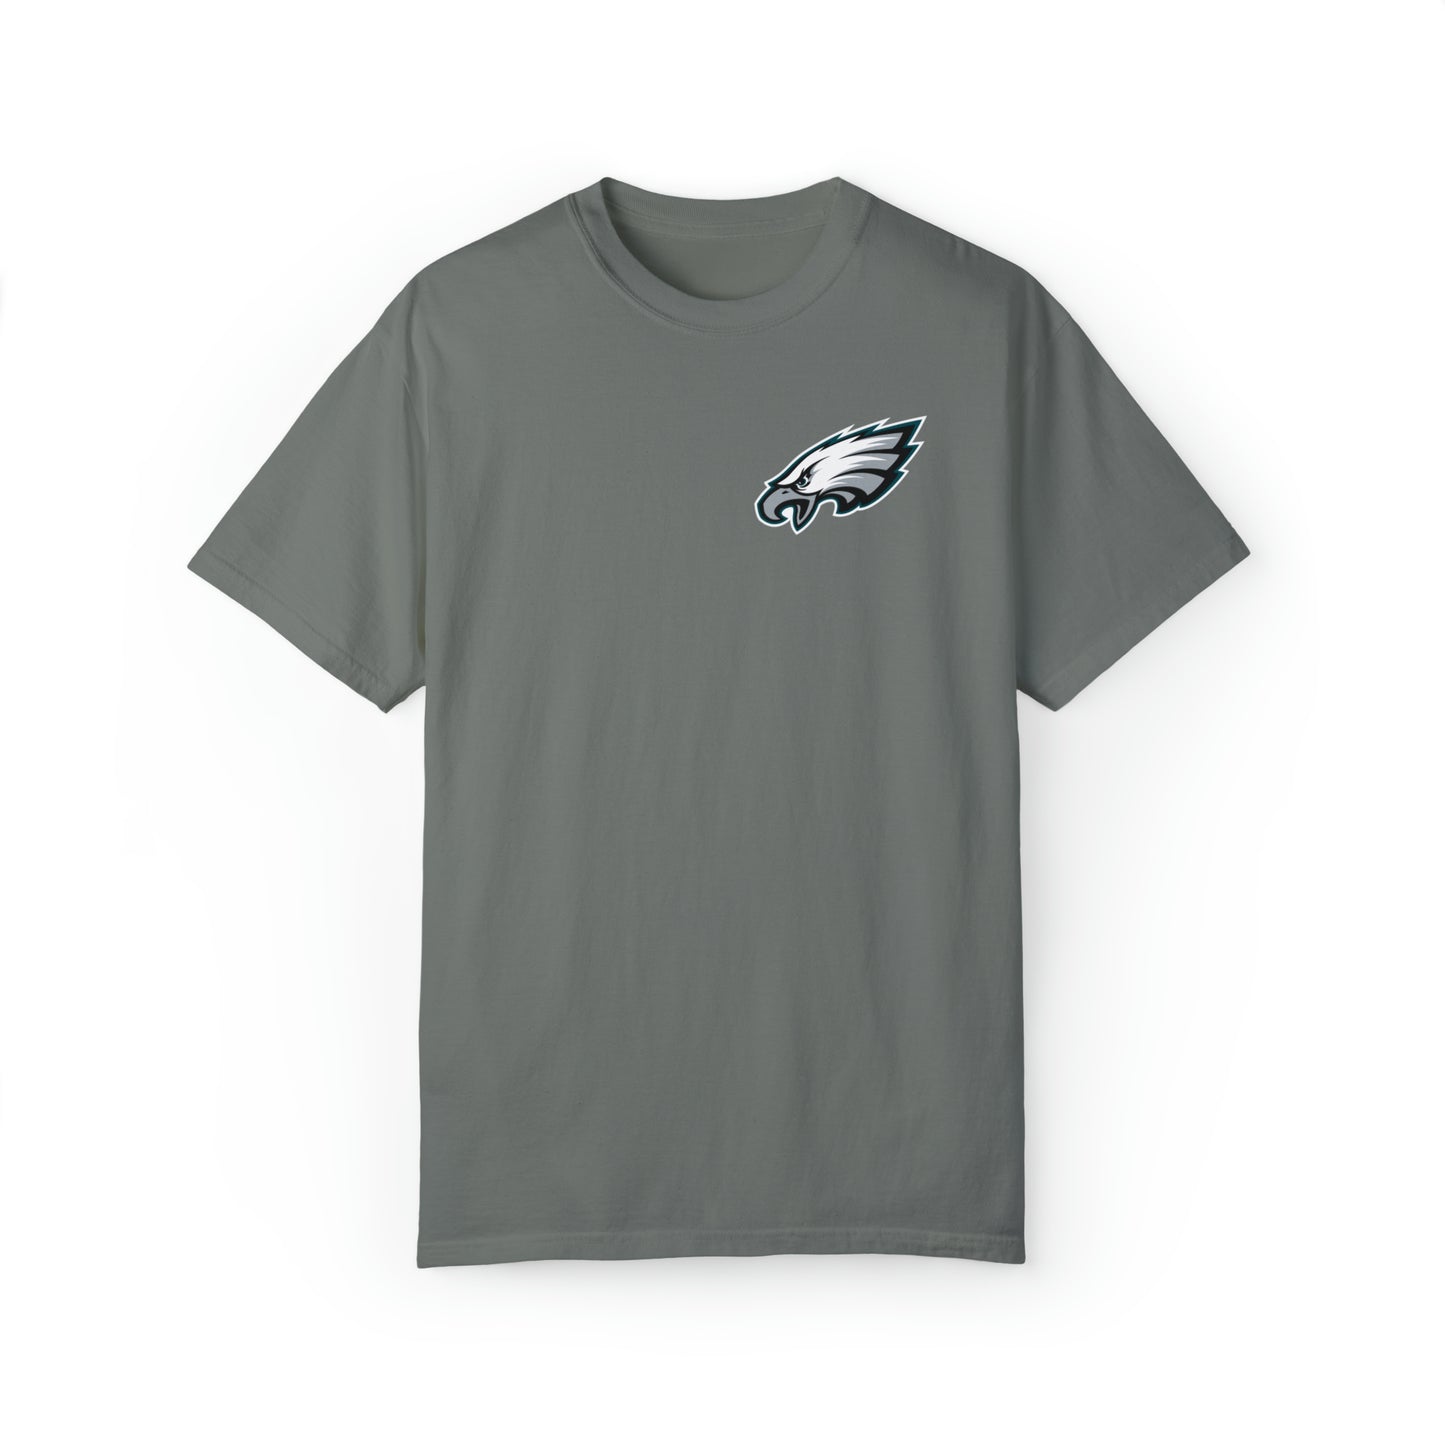 Eagles Game Day Shirt